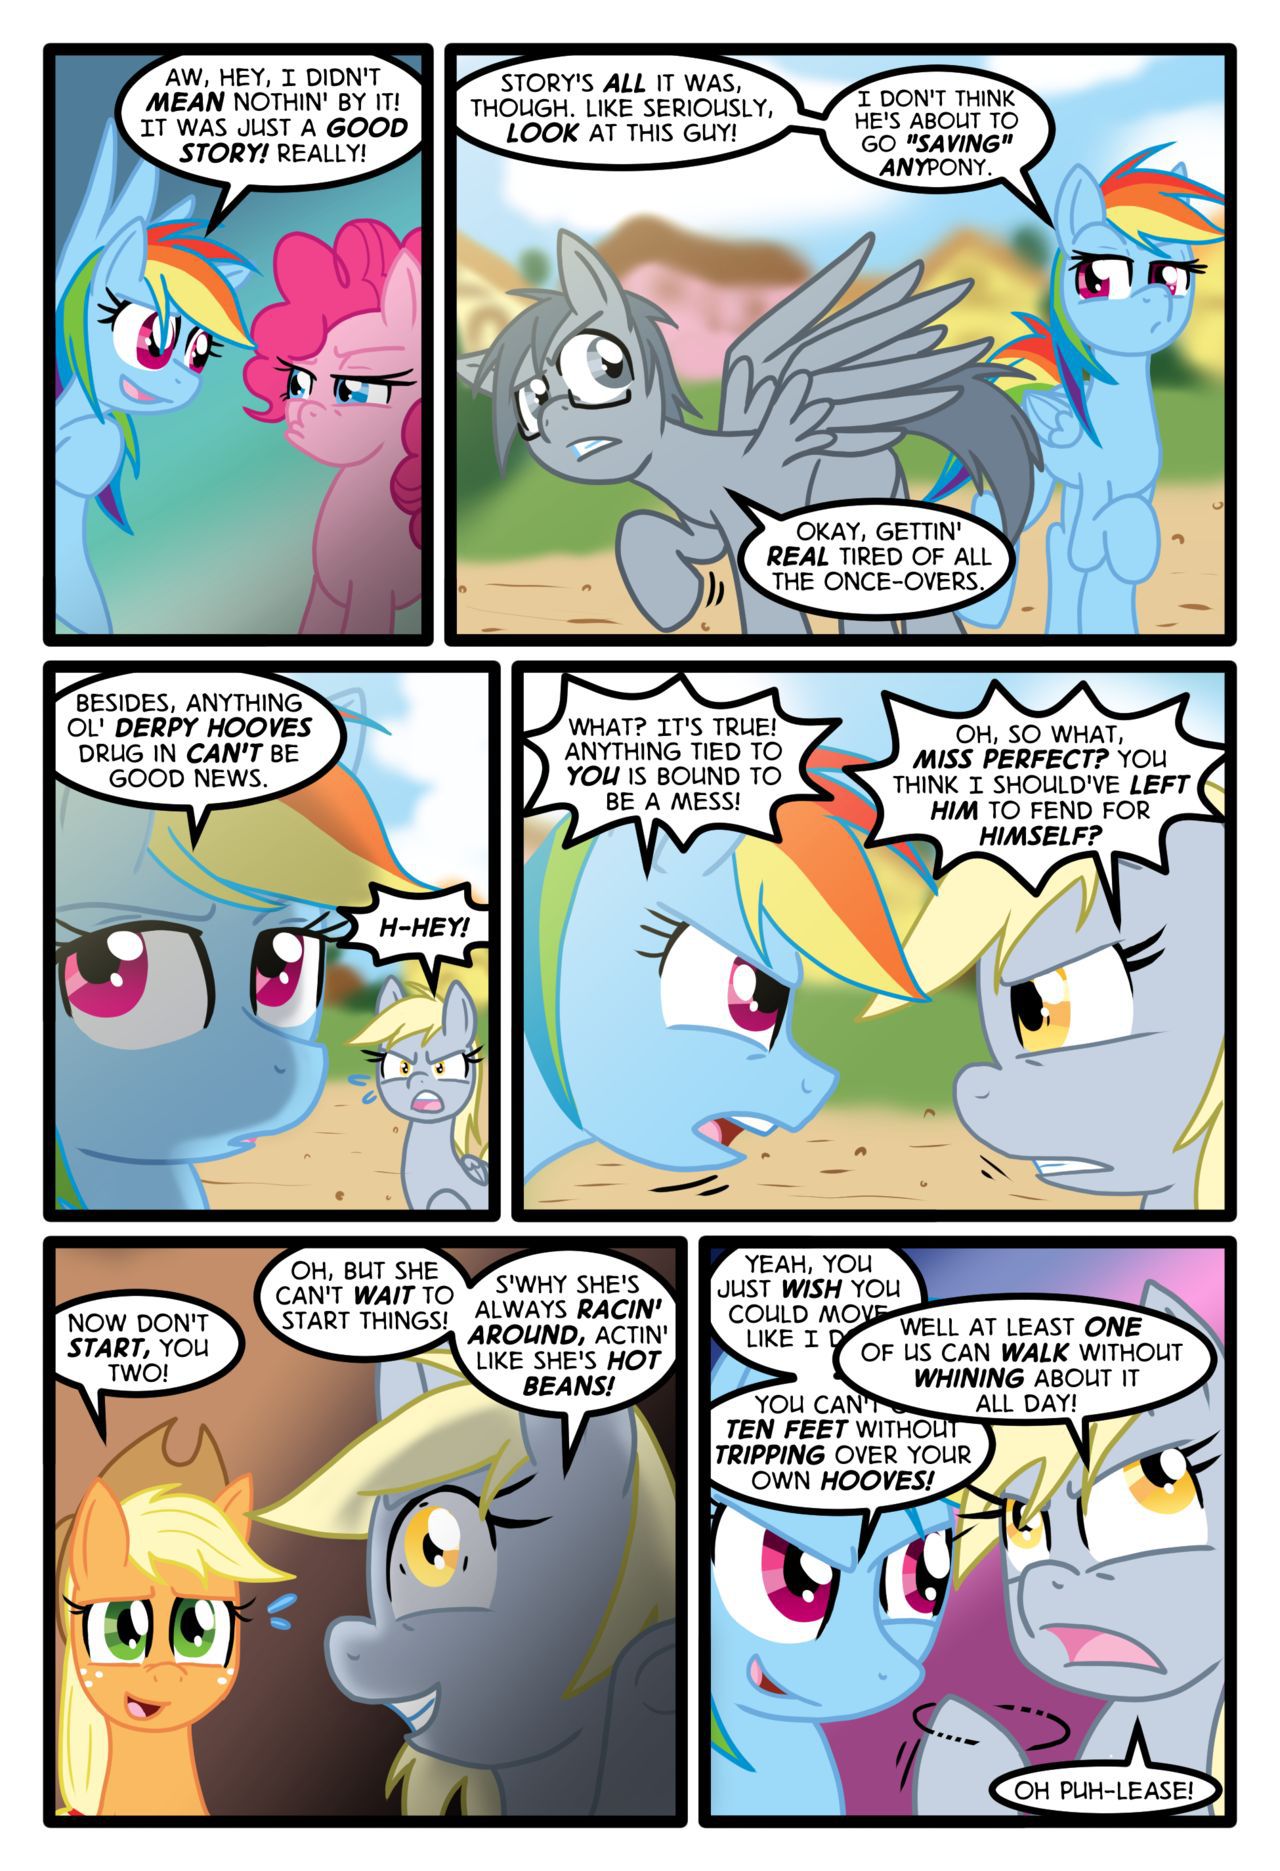 [Zaron] Lonely Hooves (My Little Pony Friendship Is Magic) [Ongoing] 23